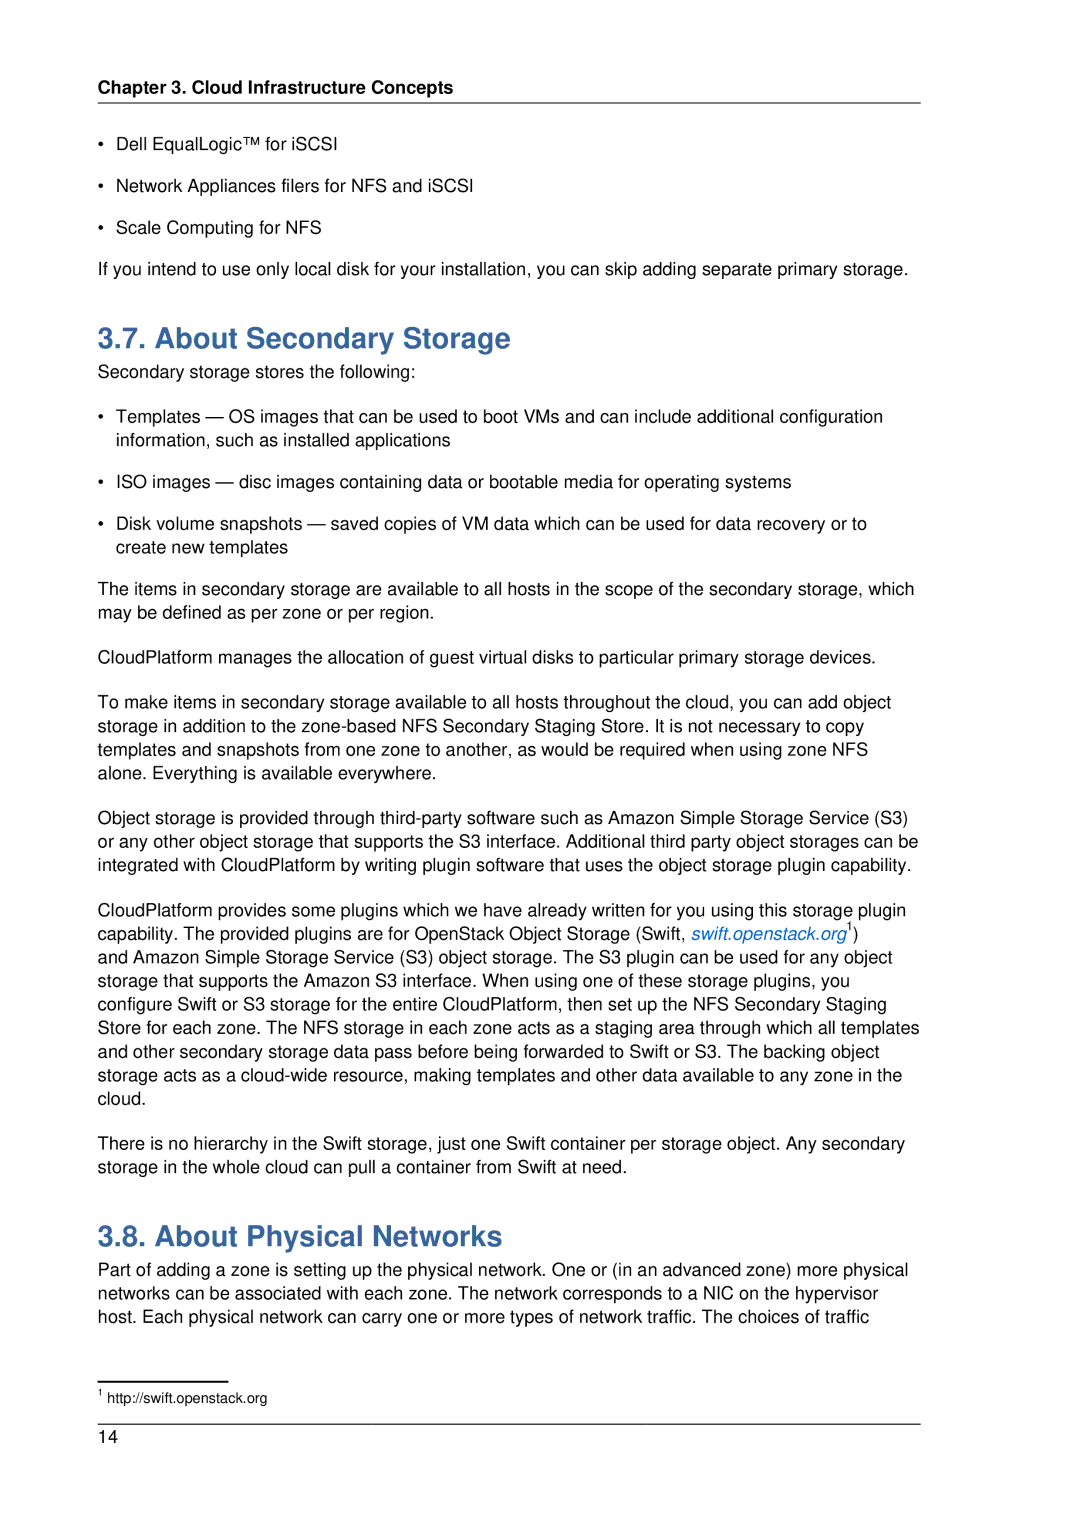 Citrix Systems 4.2 manual About Secondary Storage, About Physical Networks 